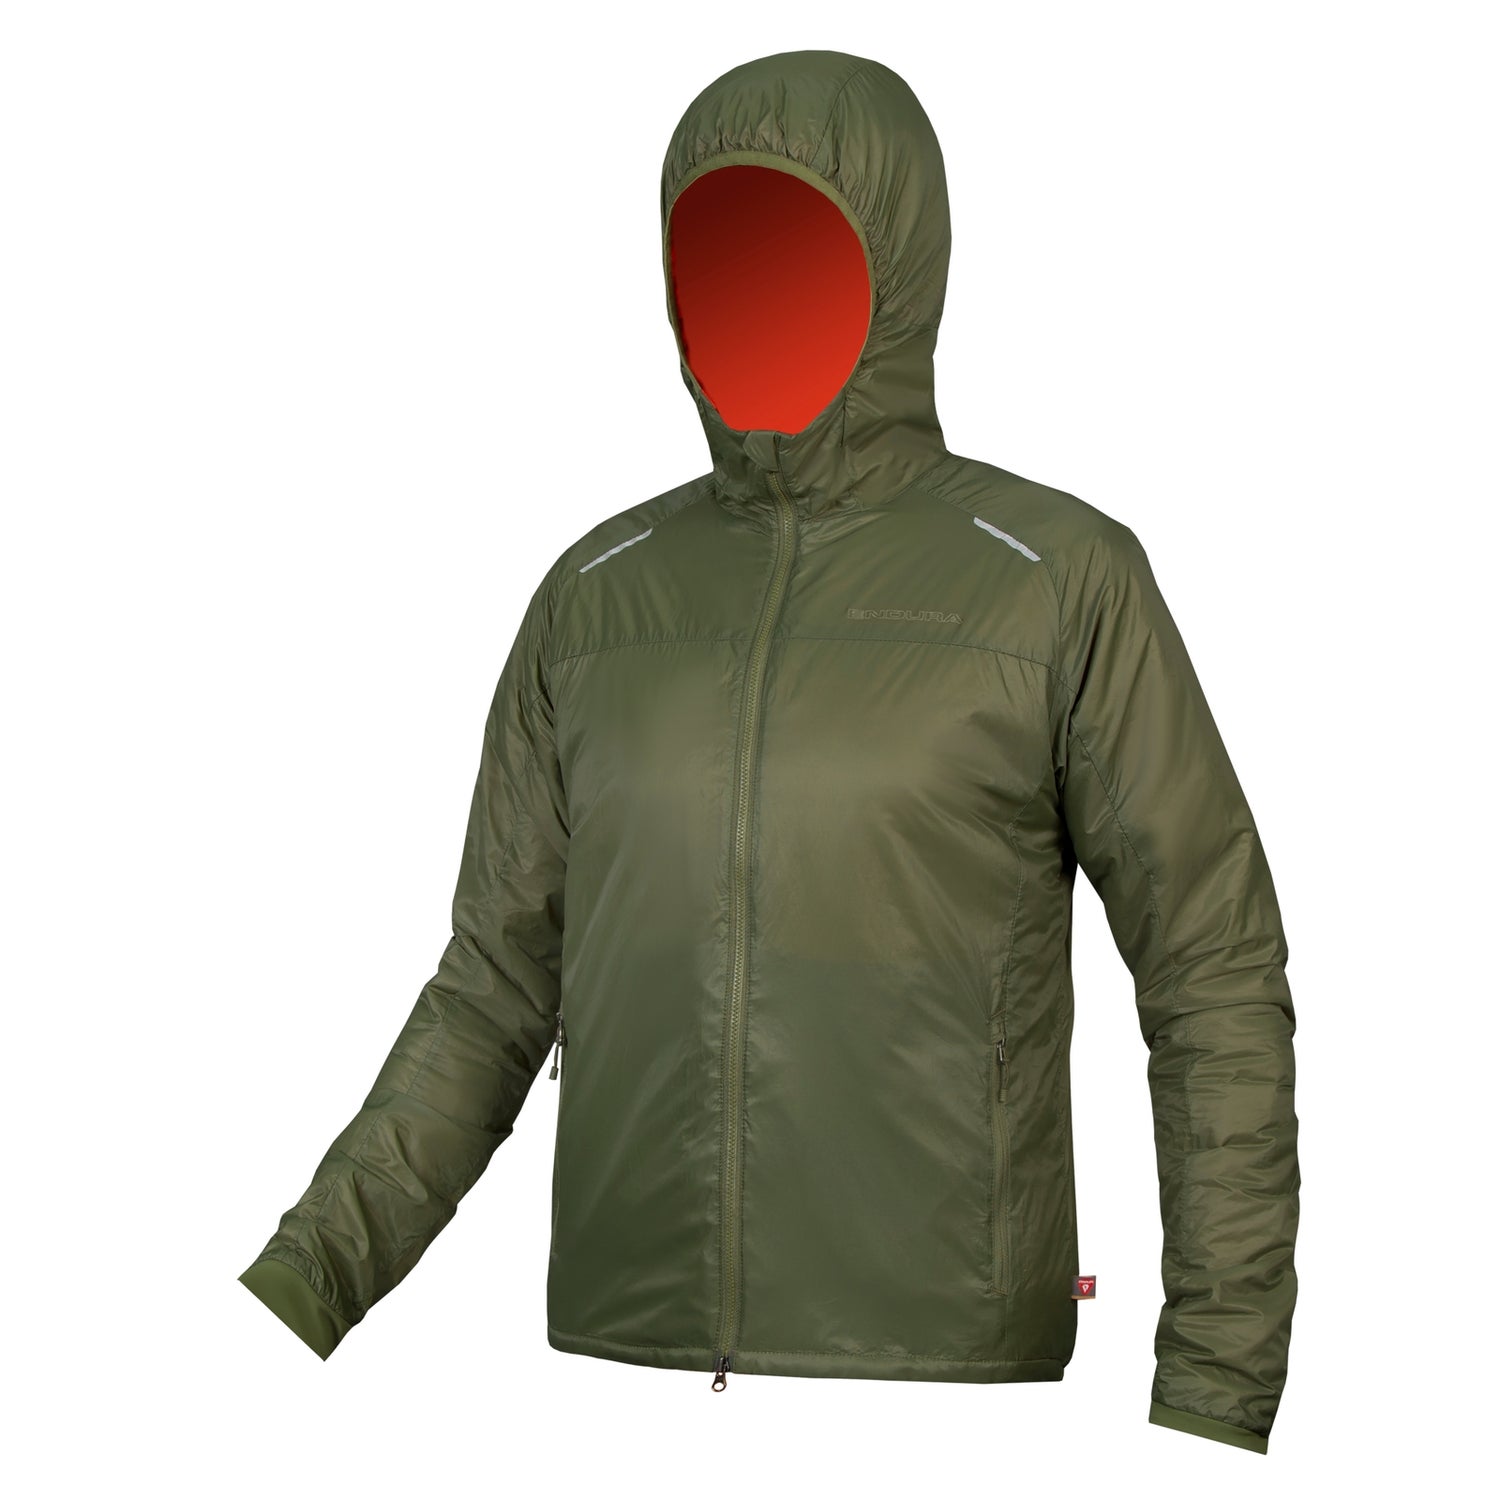 Men's GV500 Insulated Jacket - Olive Green - XXL